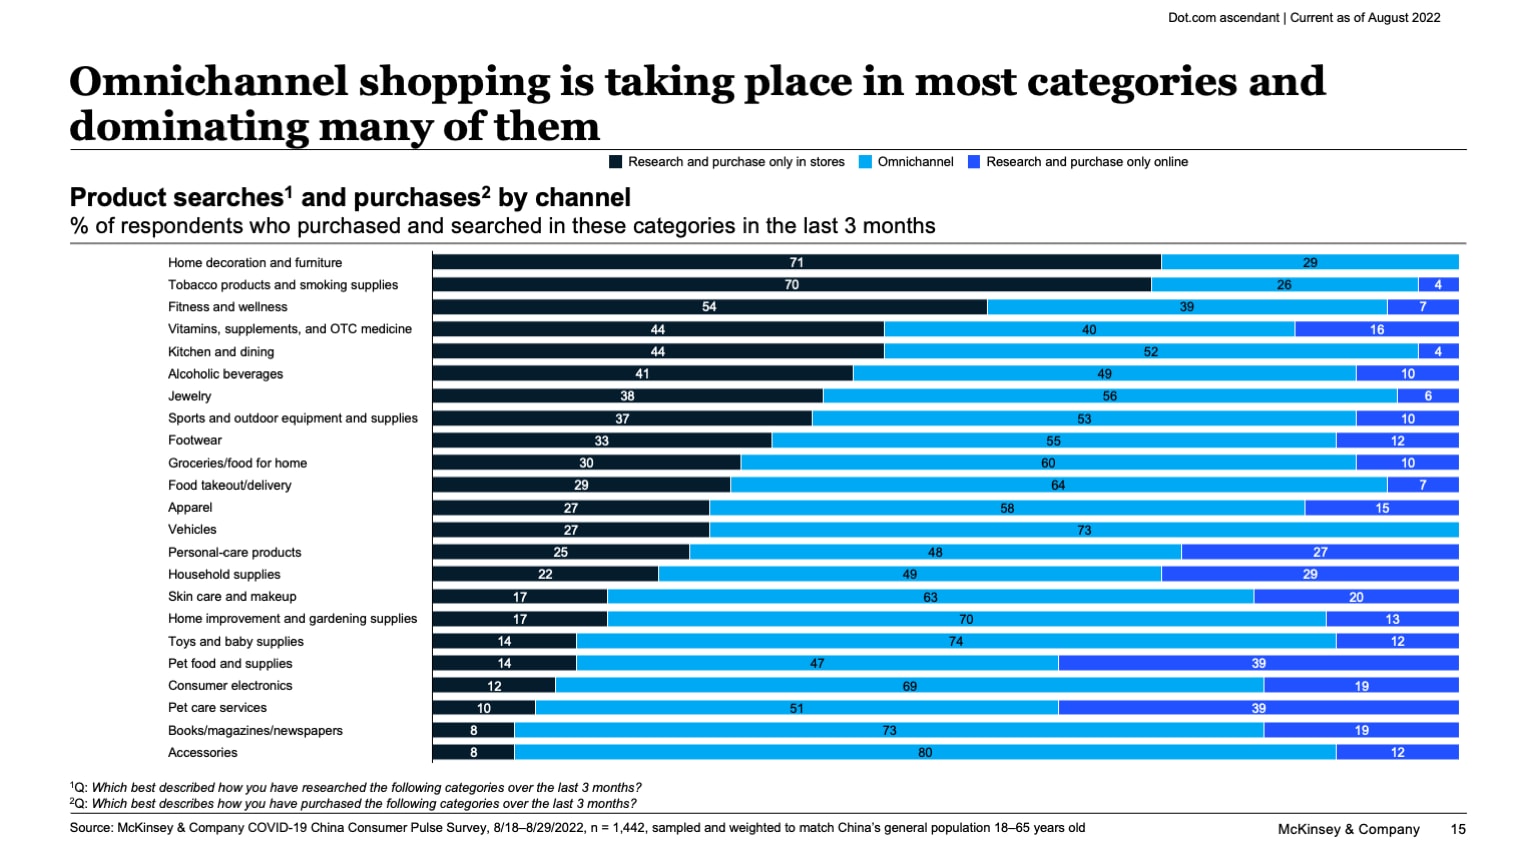 Omnichannel shopping is taking place in most categories and dominating many of them